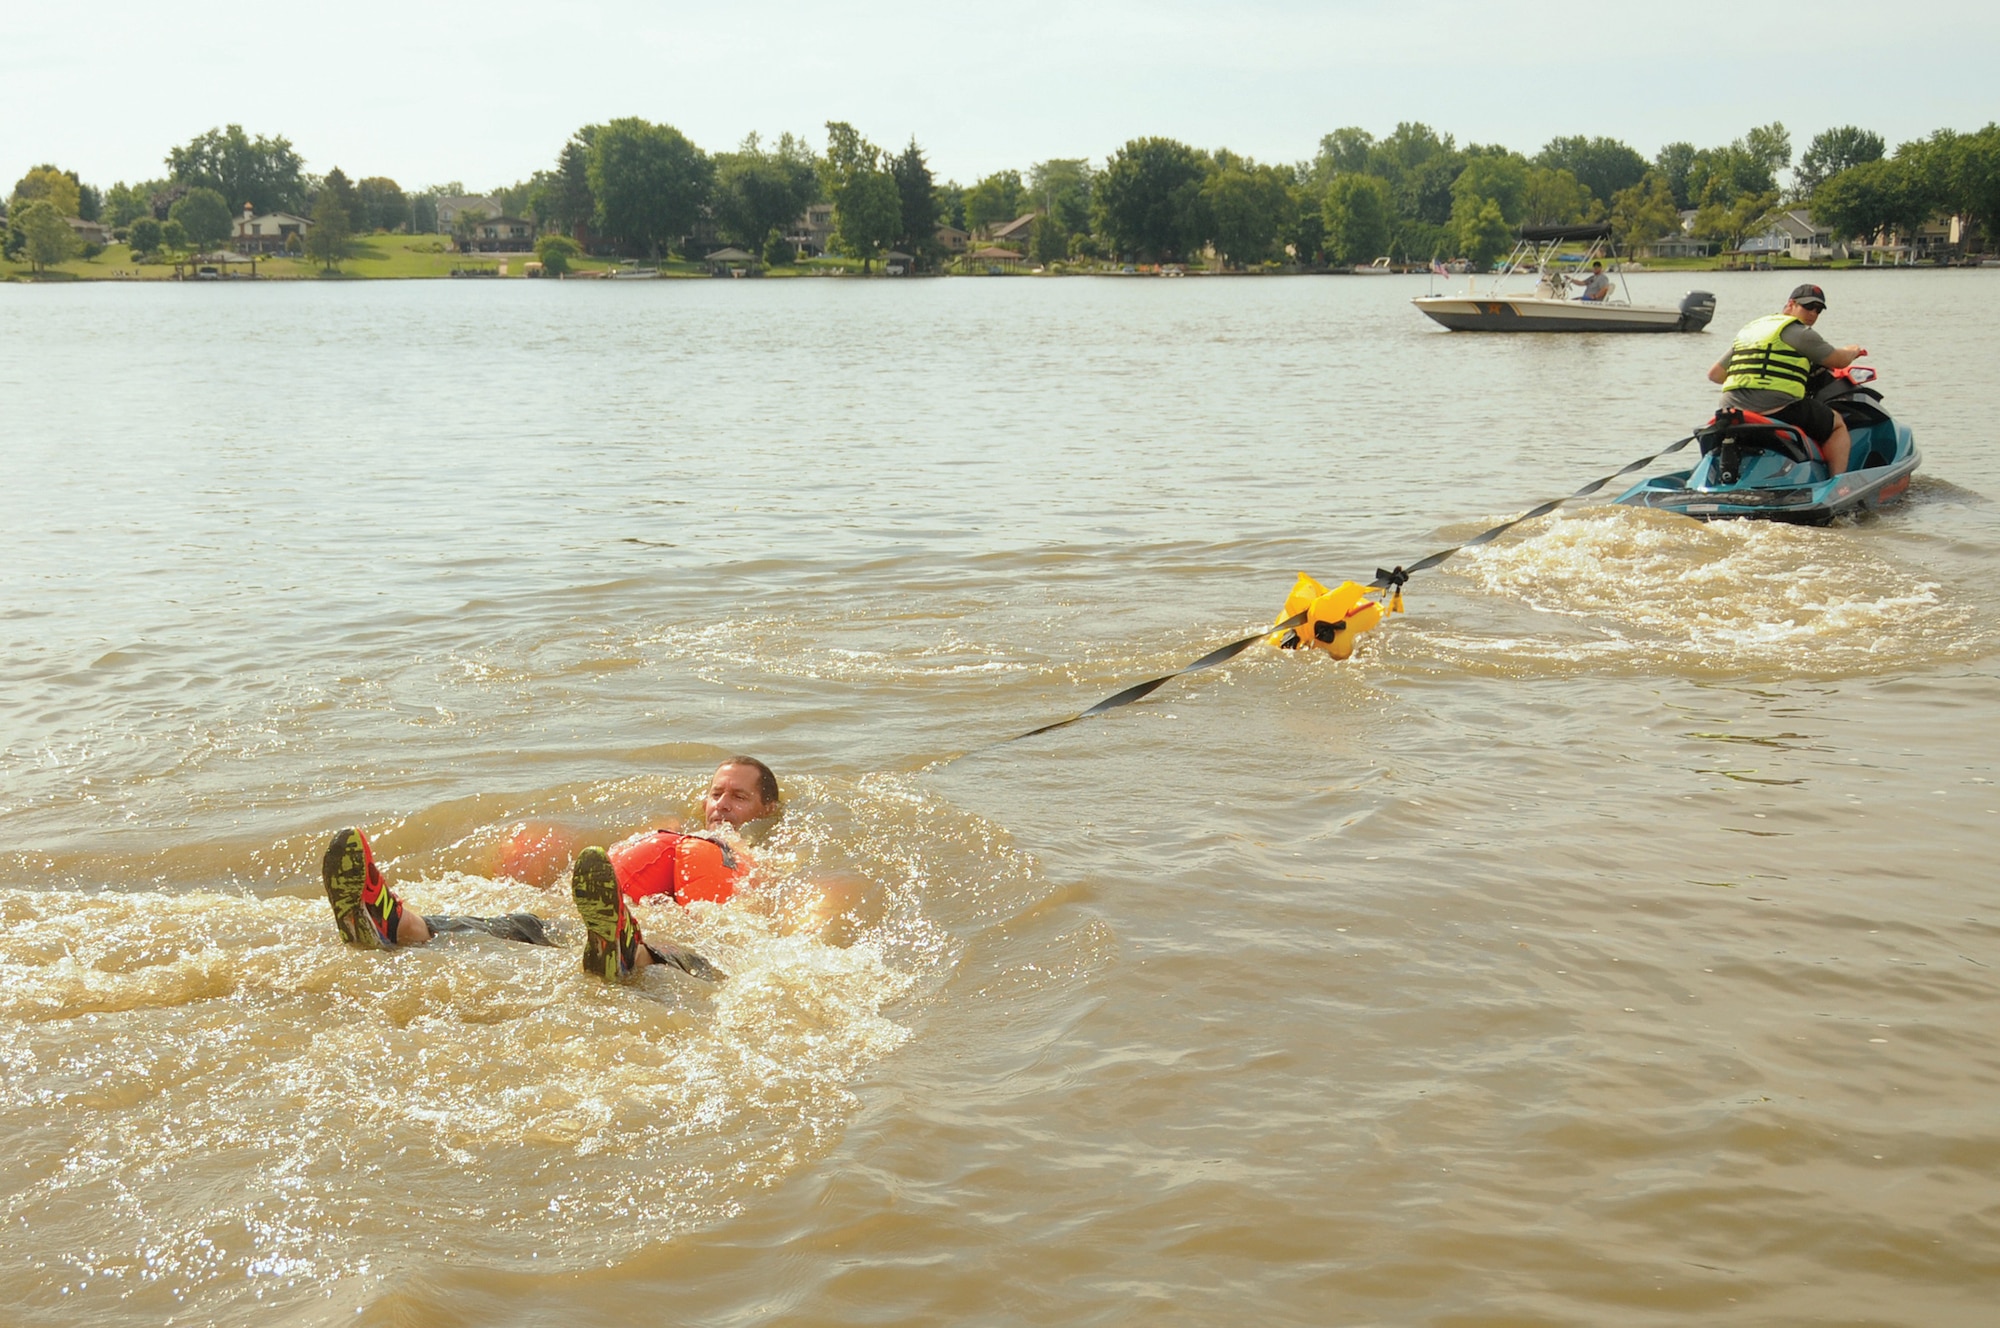 Col. John Robinson, 445th Operations Group commander, is dragged through the water by Tech. Sgt. Mackenzie Thompson, 445th Operations Support Squadron aircrew flight equipment technician, at Choctaw Lake July 14, 2019. This training simulates the dragging motion experienced when landing in water with a parachute.